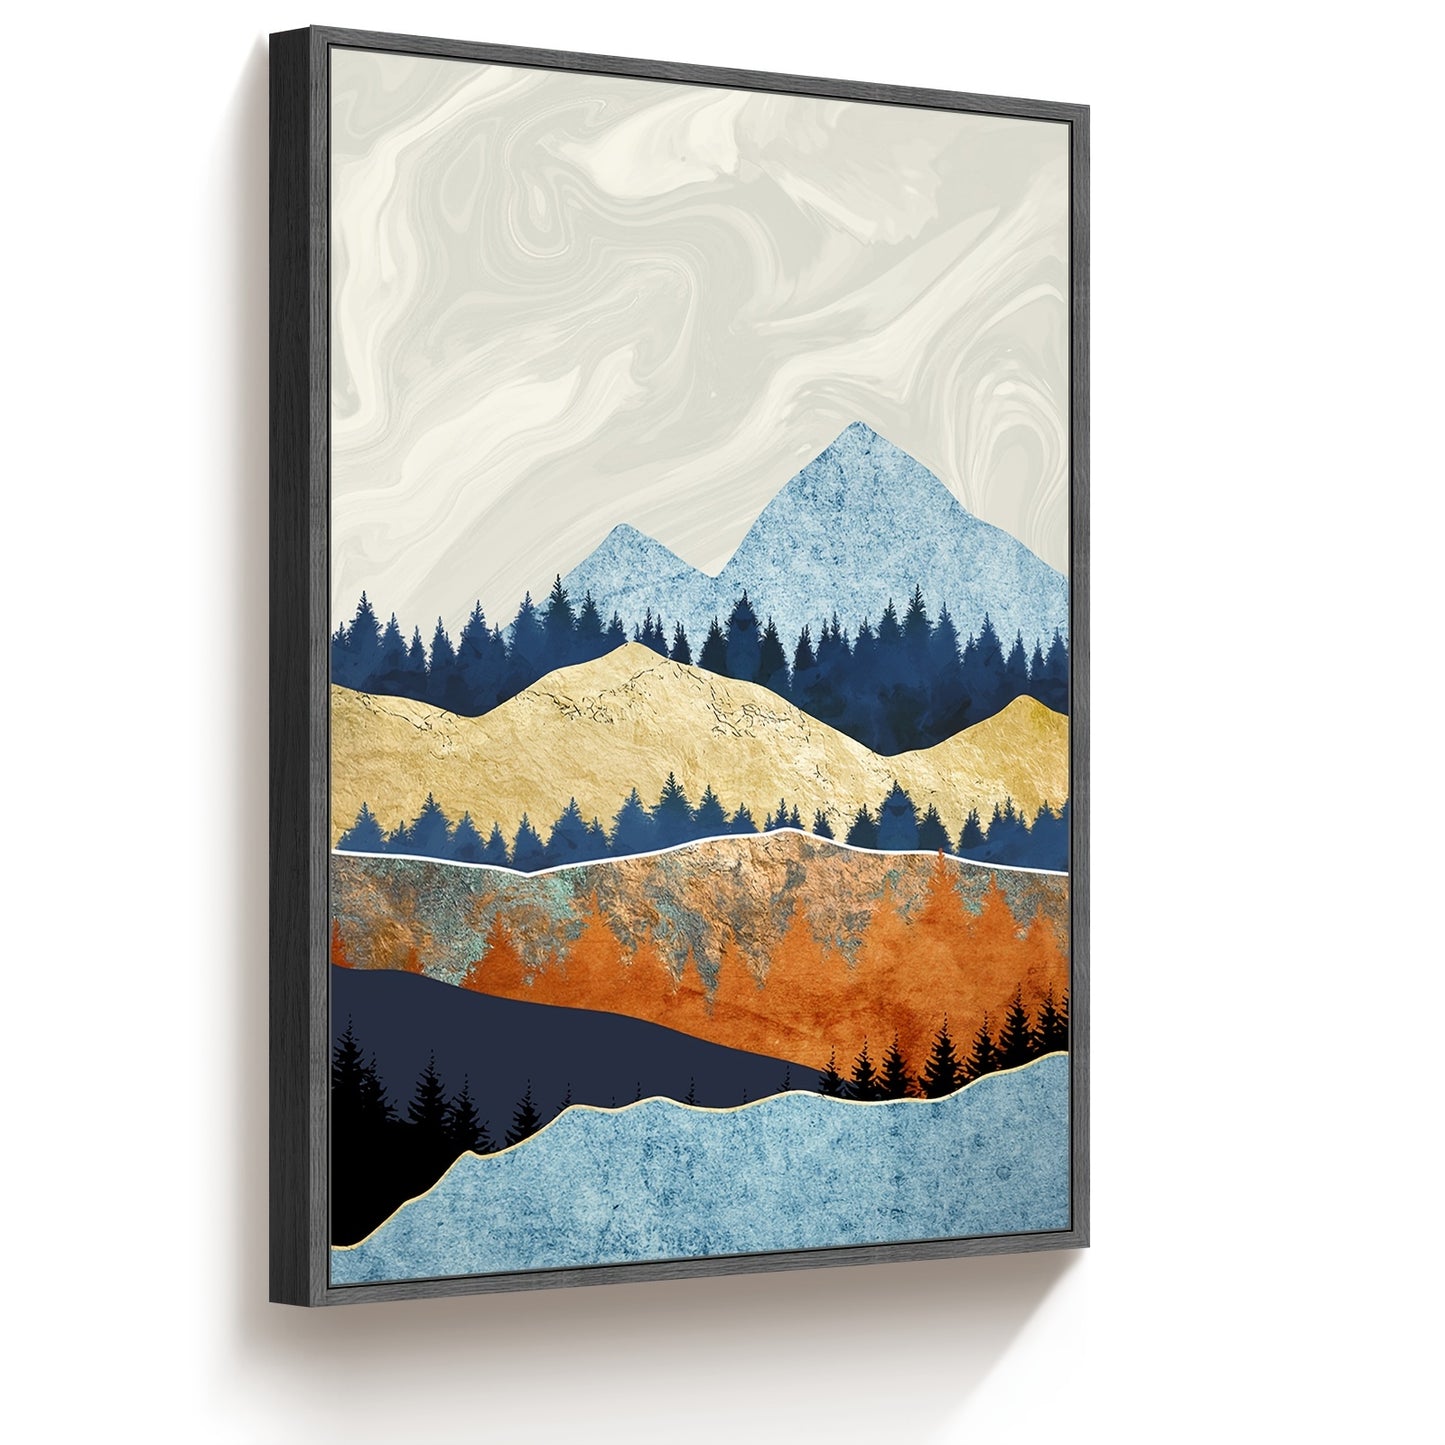 Framed Rolling Mountain Landscape Wall Canvas Decor